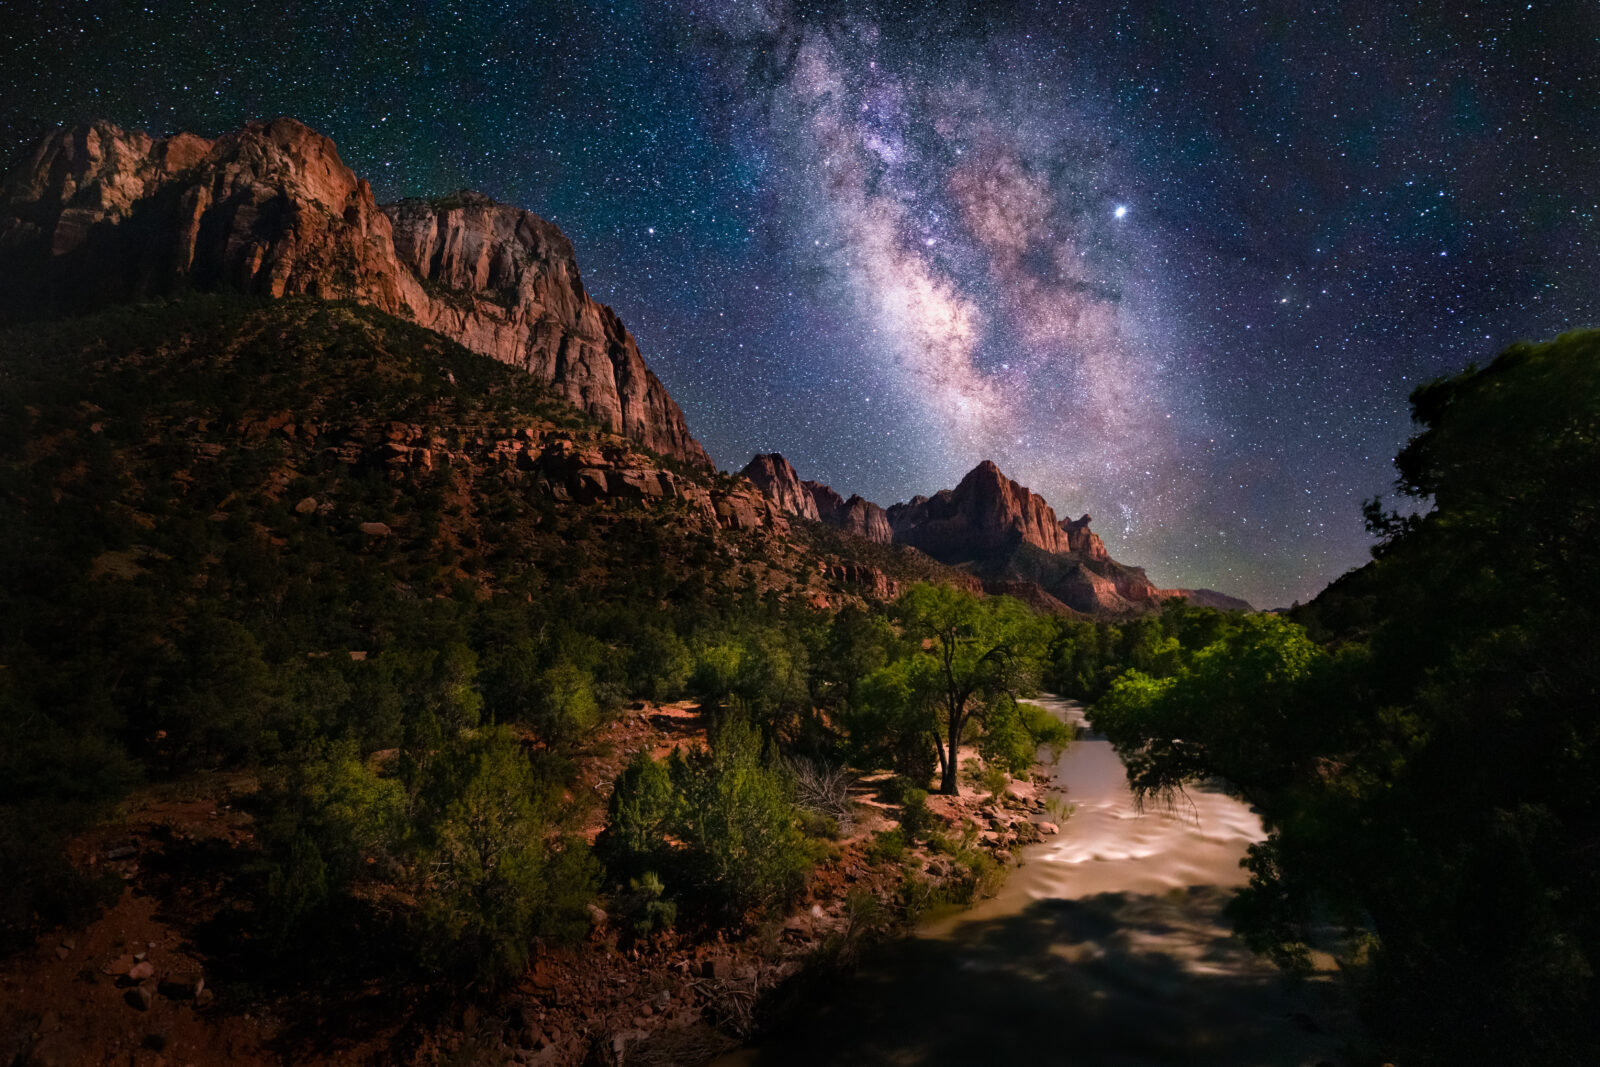 Night scene of the Milky Way and stars at Zion National Park